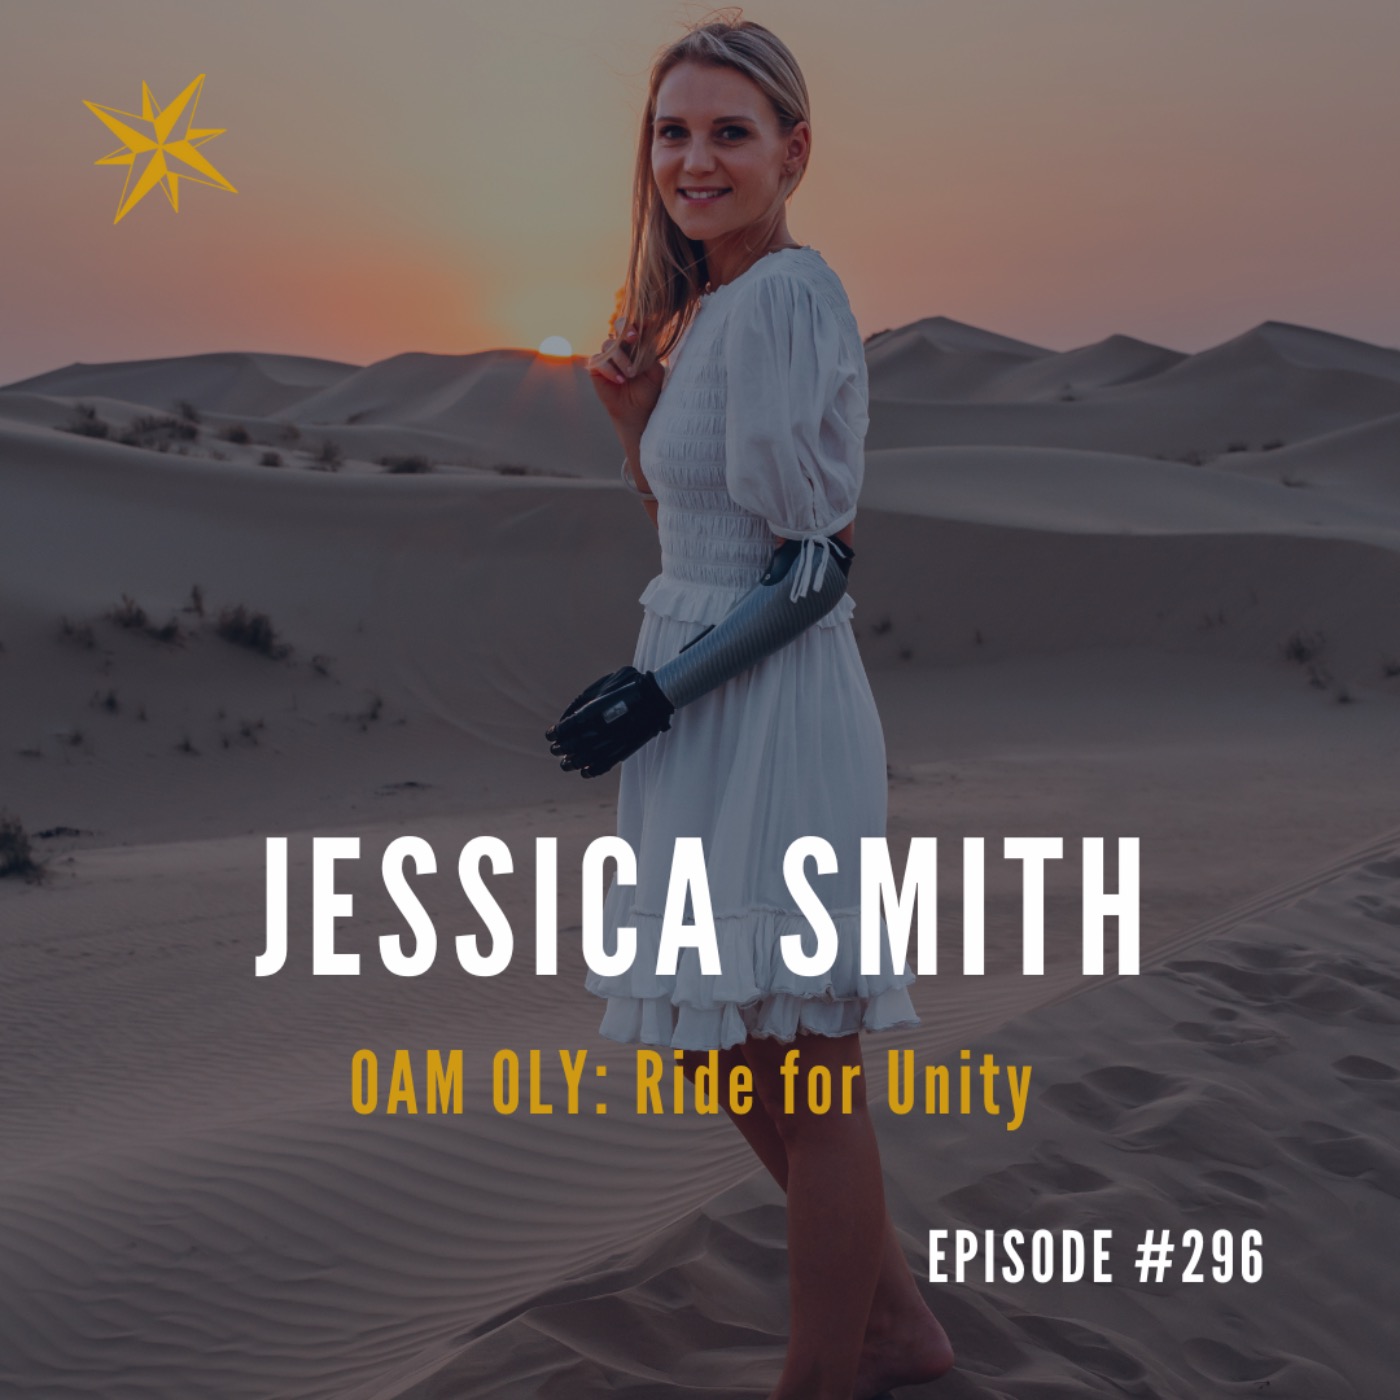 #296: Jessica Smith OAM OLY: Ride for Unity